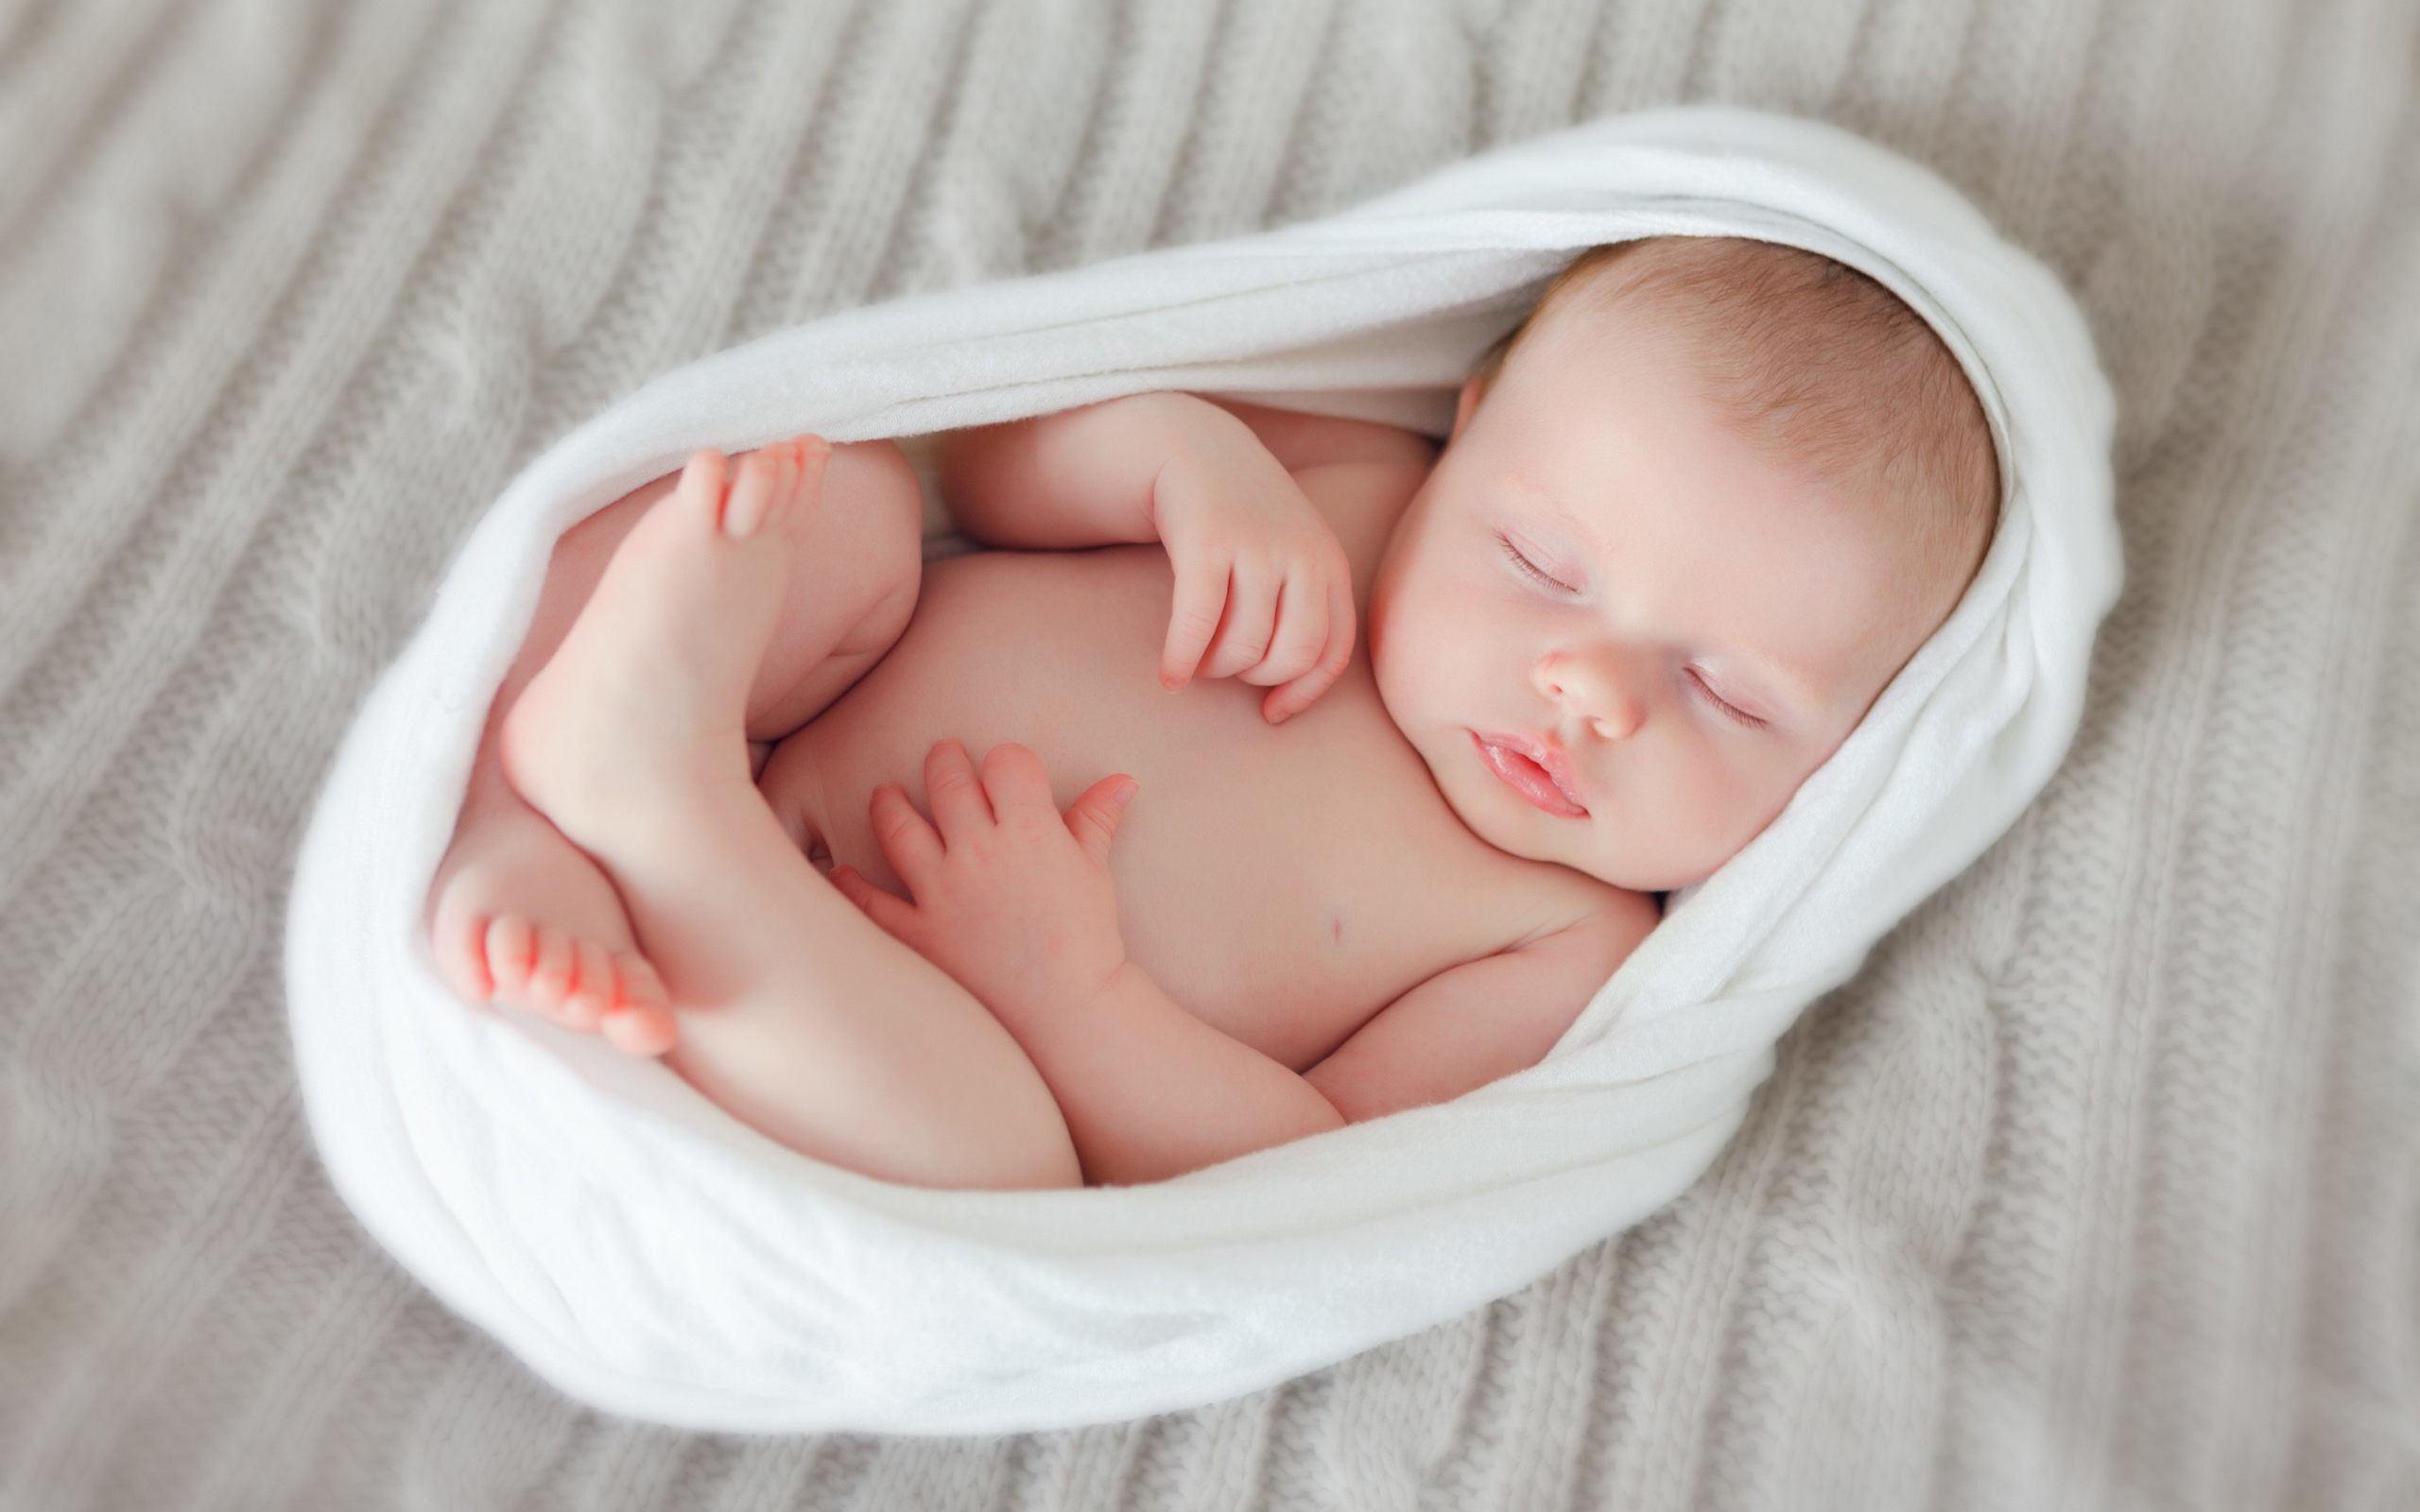 2560x1600 Cute and Sweet Baby Sleeping Image The soul is healed by being